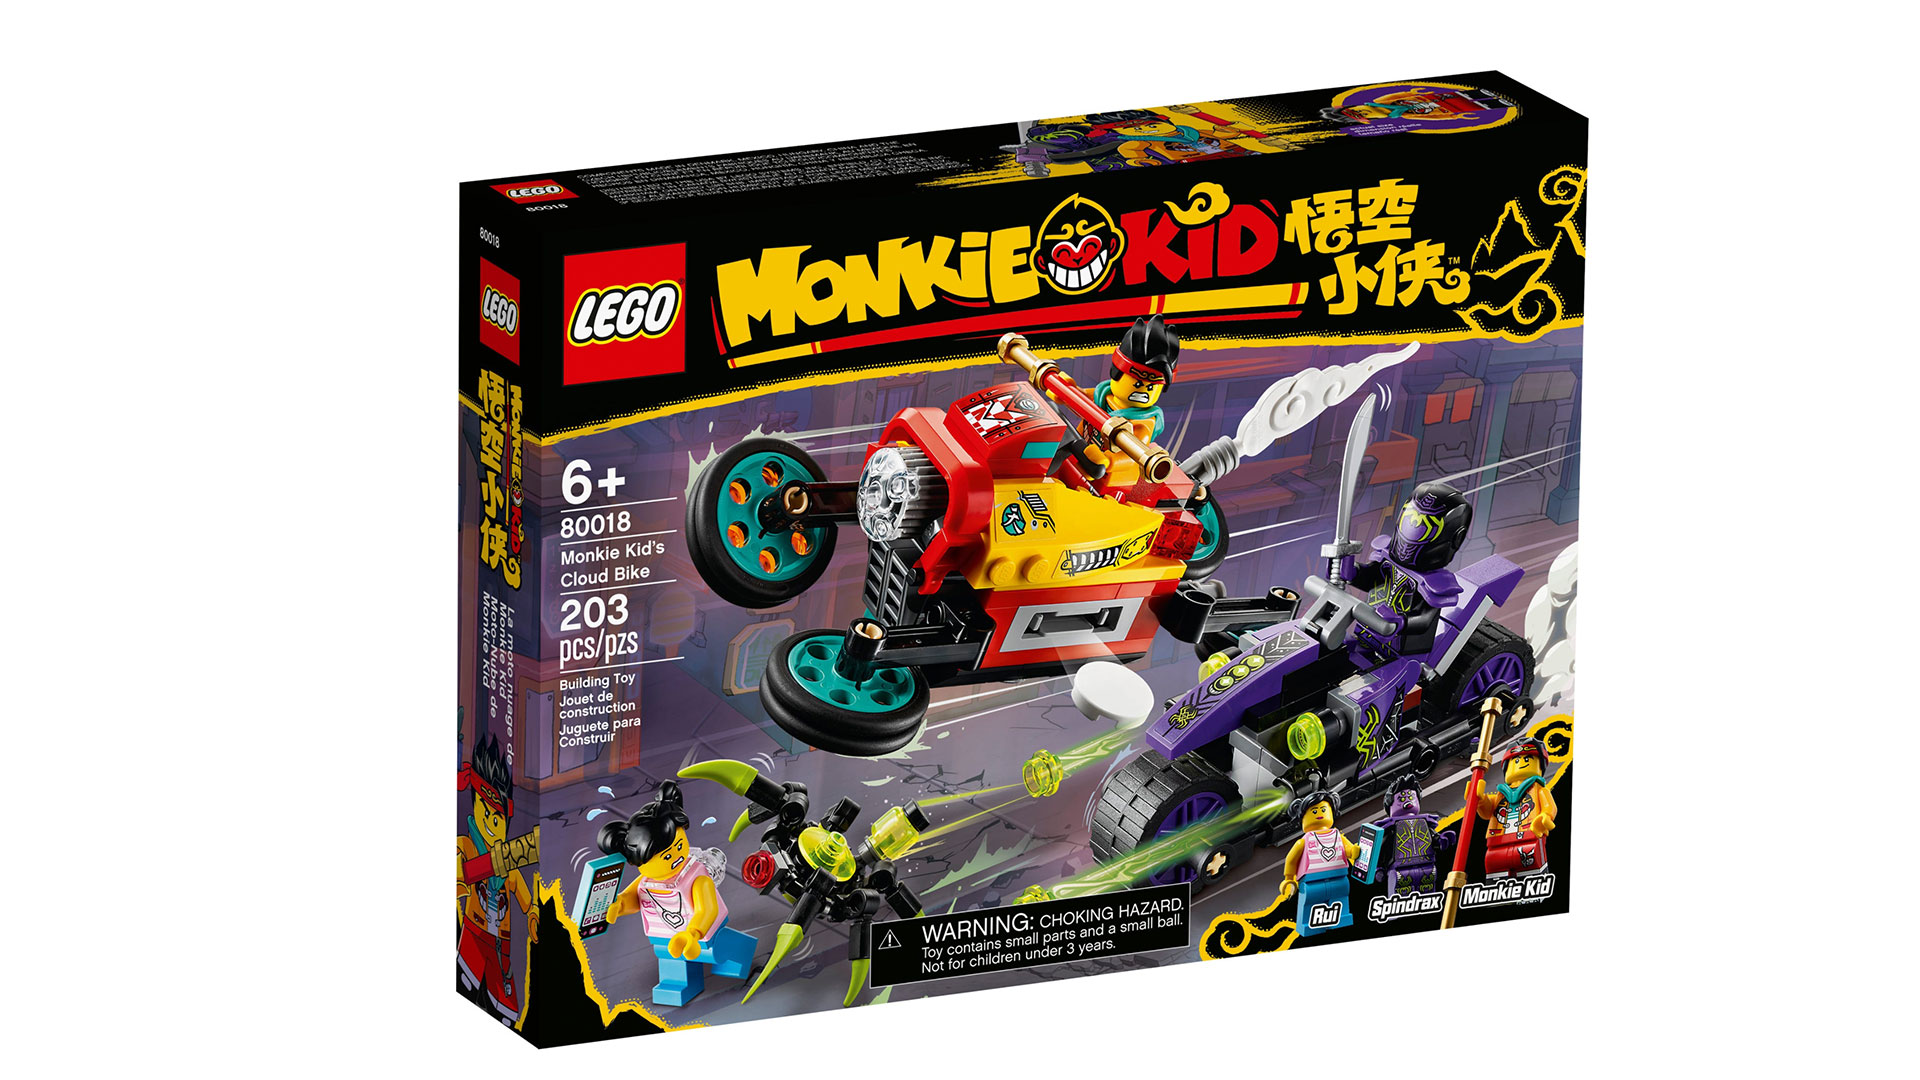 Children will love role-playing as the heroic Monkie Kid trying to save a civilian from Spindrax with this LEGO® Monkie Kid™ motorcycle toy playset (80018). It features a Cloud Bike with transforming wheels for flight mode and 2 hidden disc shooters, Spindrax’s bike with 2 stud shooters, plus a posable robotic spider toy. Easily portable and perfect for action-packed, everyday play sessions, the set includes 3 minifigures, with weapons including The Golden Staff, to inspire storytelling.